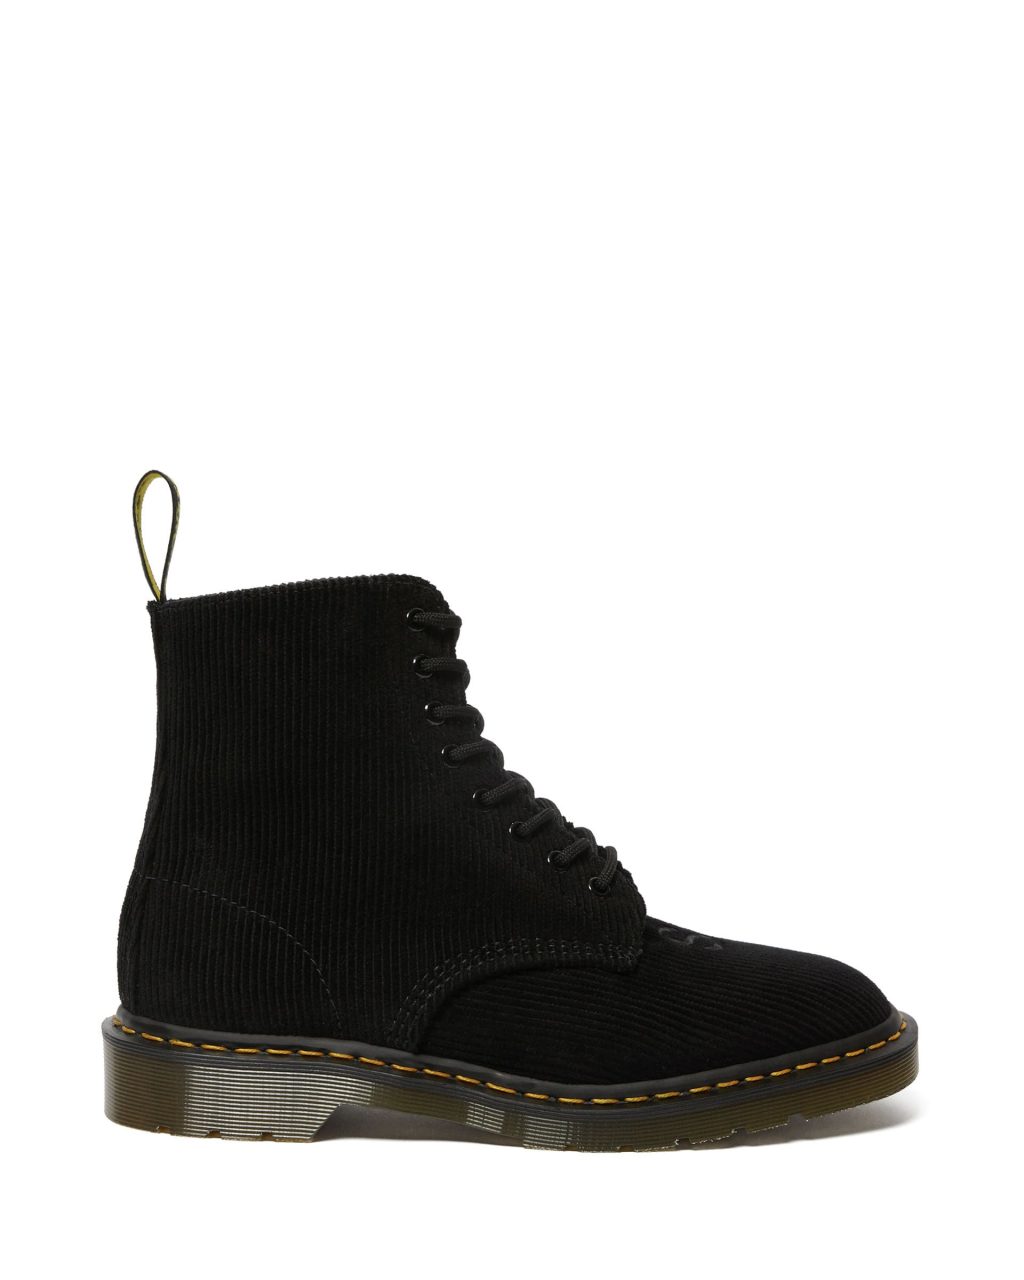 undercover-dr-martens-8-hole-boots-20ss-release-20200523